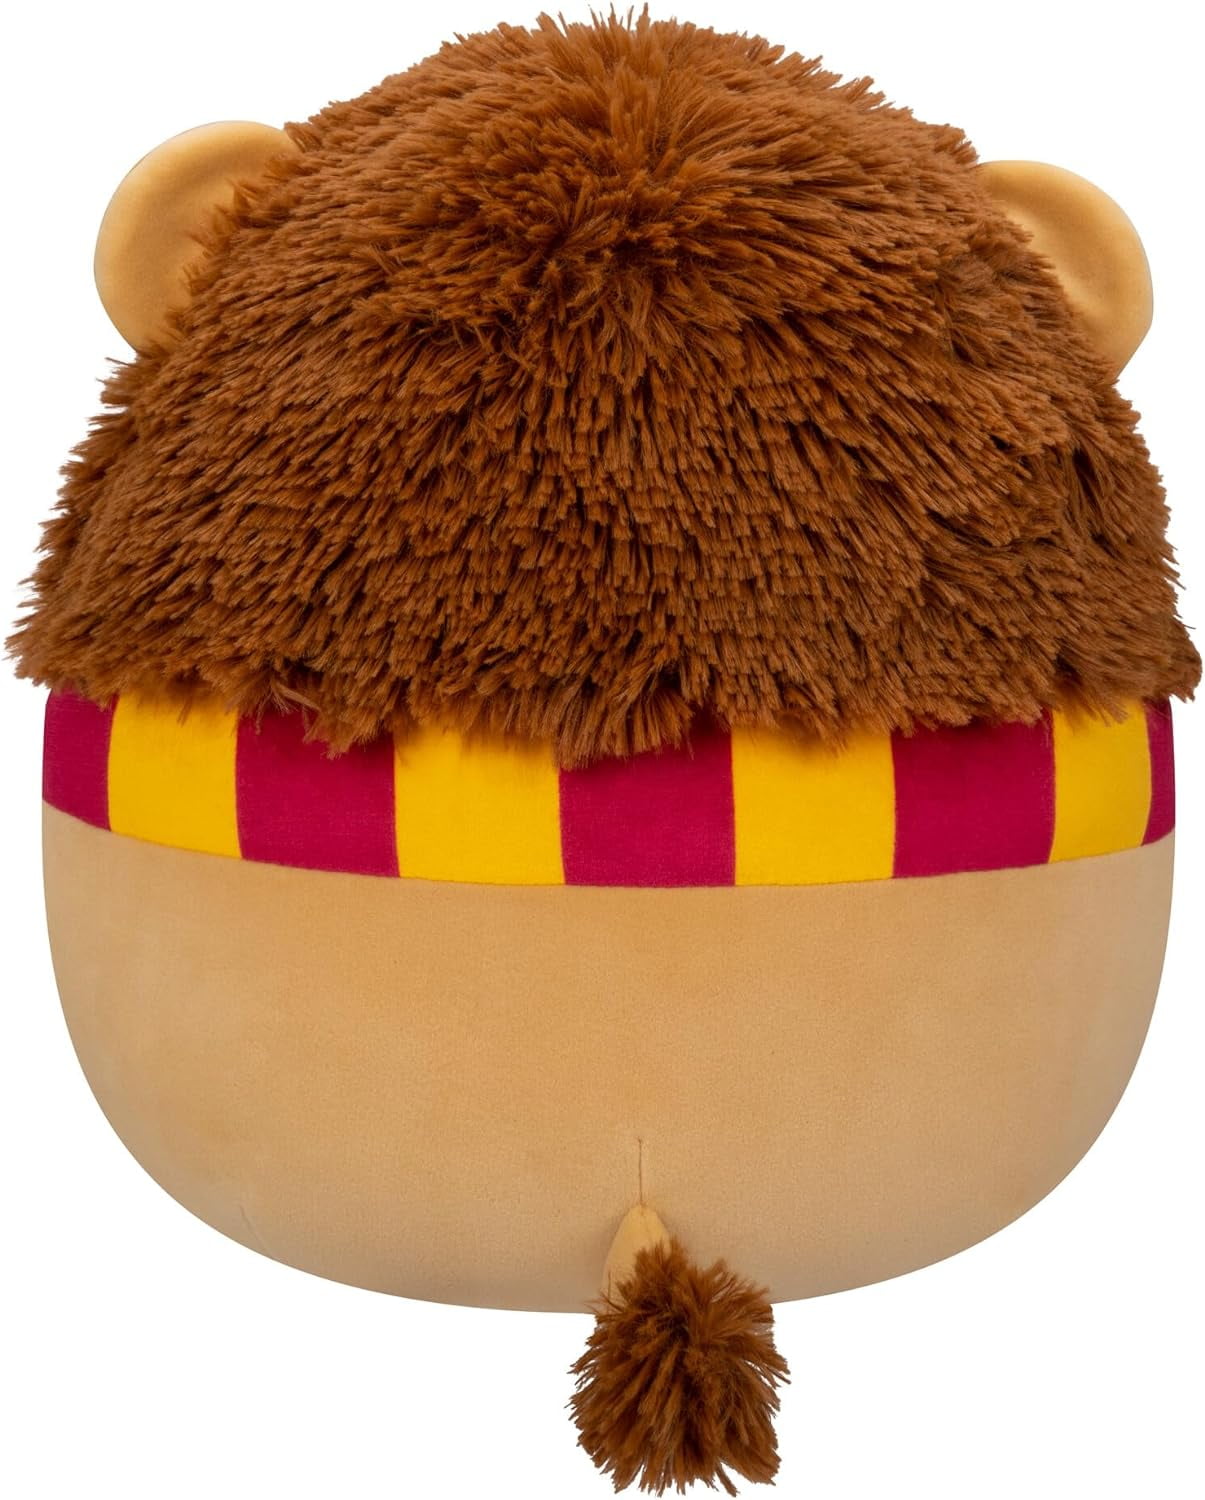 GRYFFINDOR LION 🦁 Harry Potter Original Squishmallow by Kelly Toy